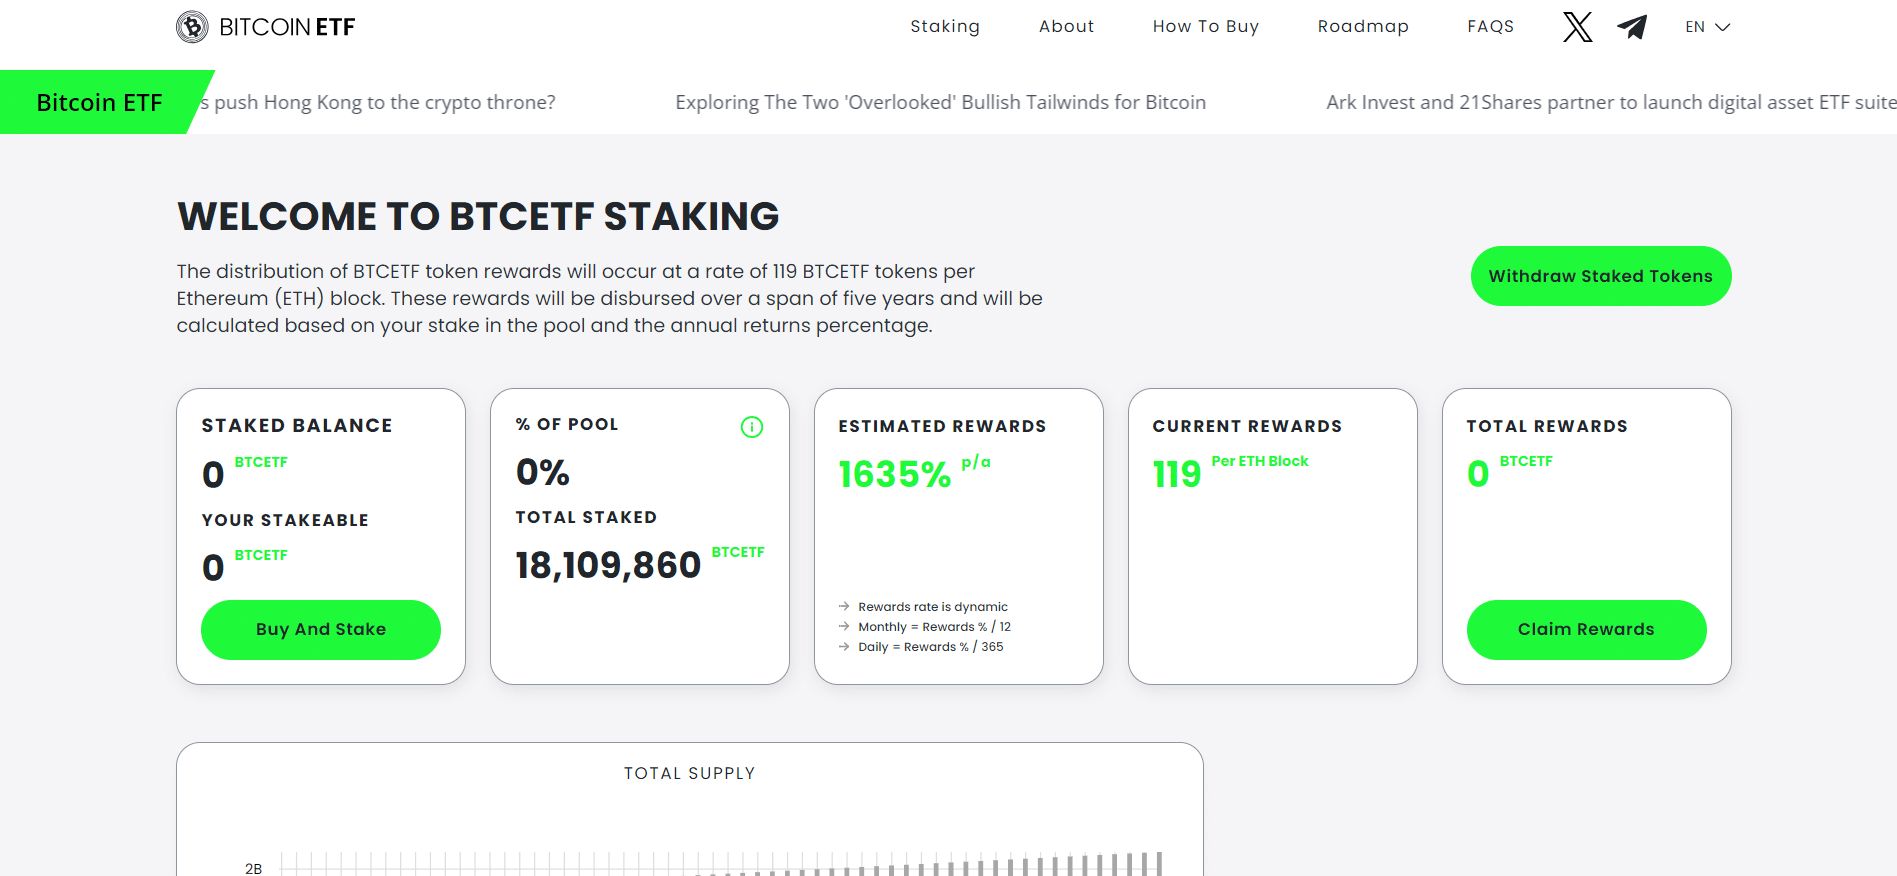 BTCETF Staking